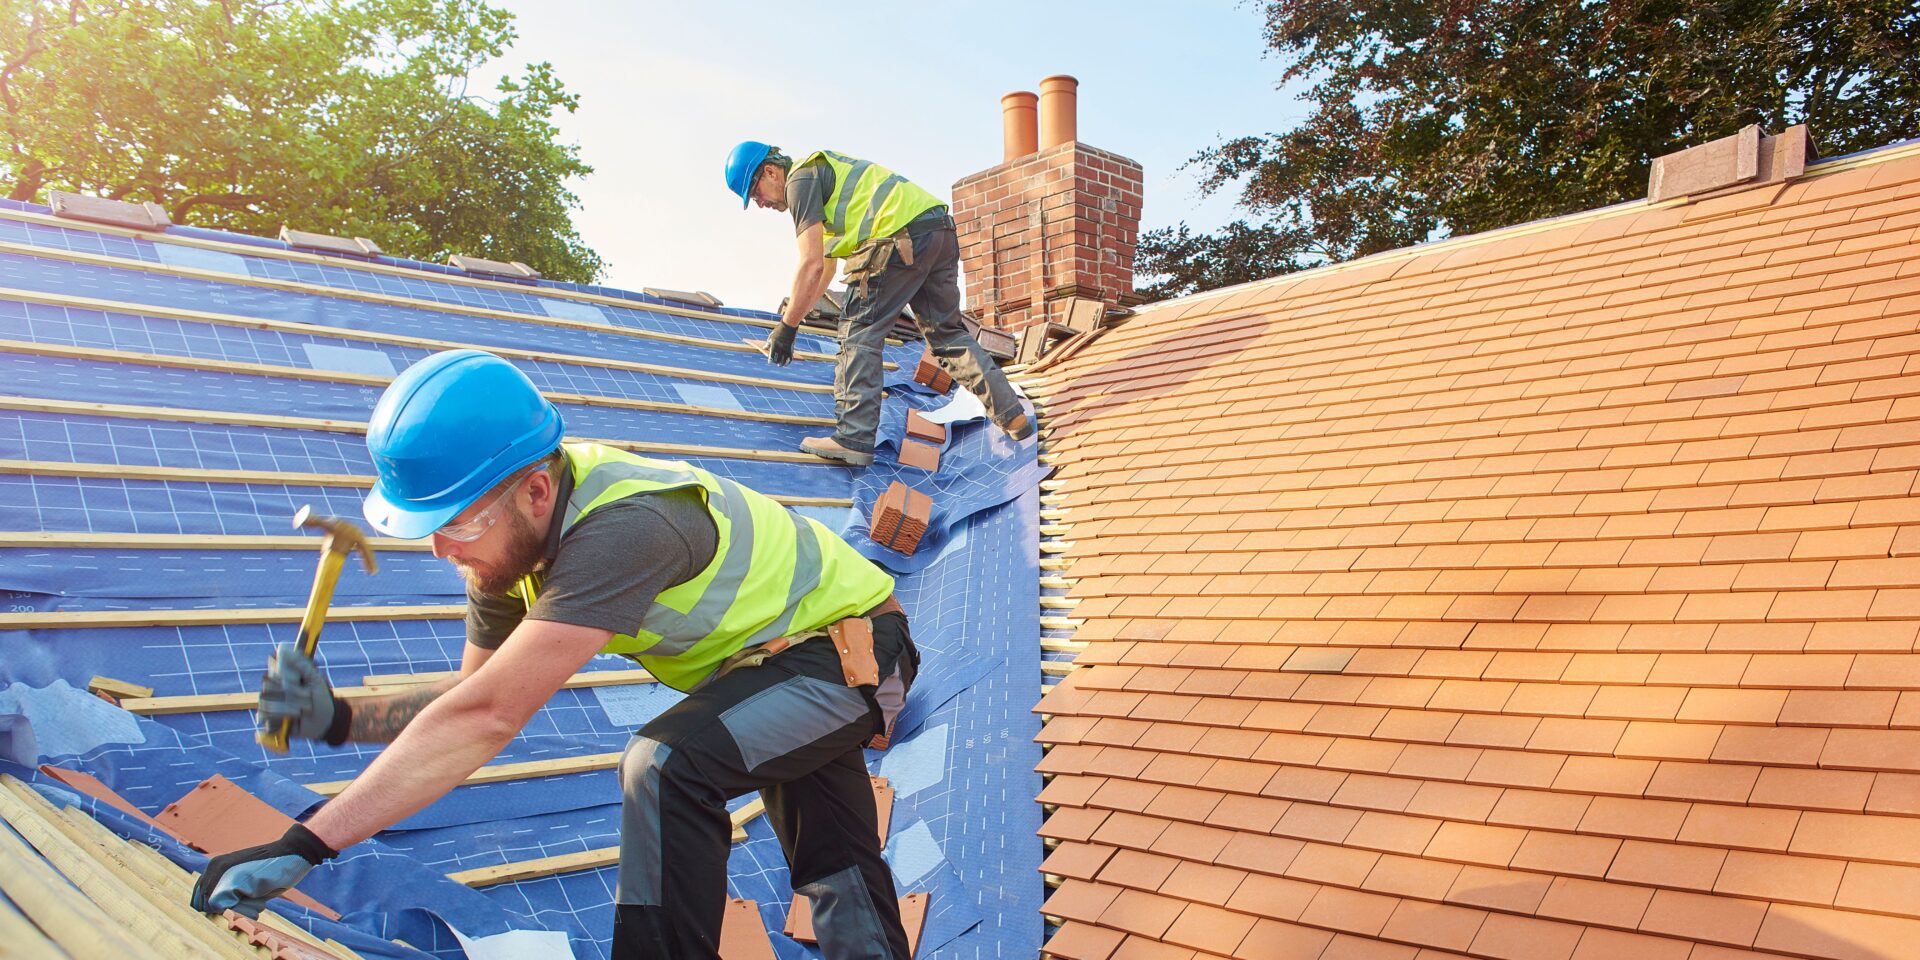 How to find the best roofing services near you